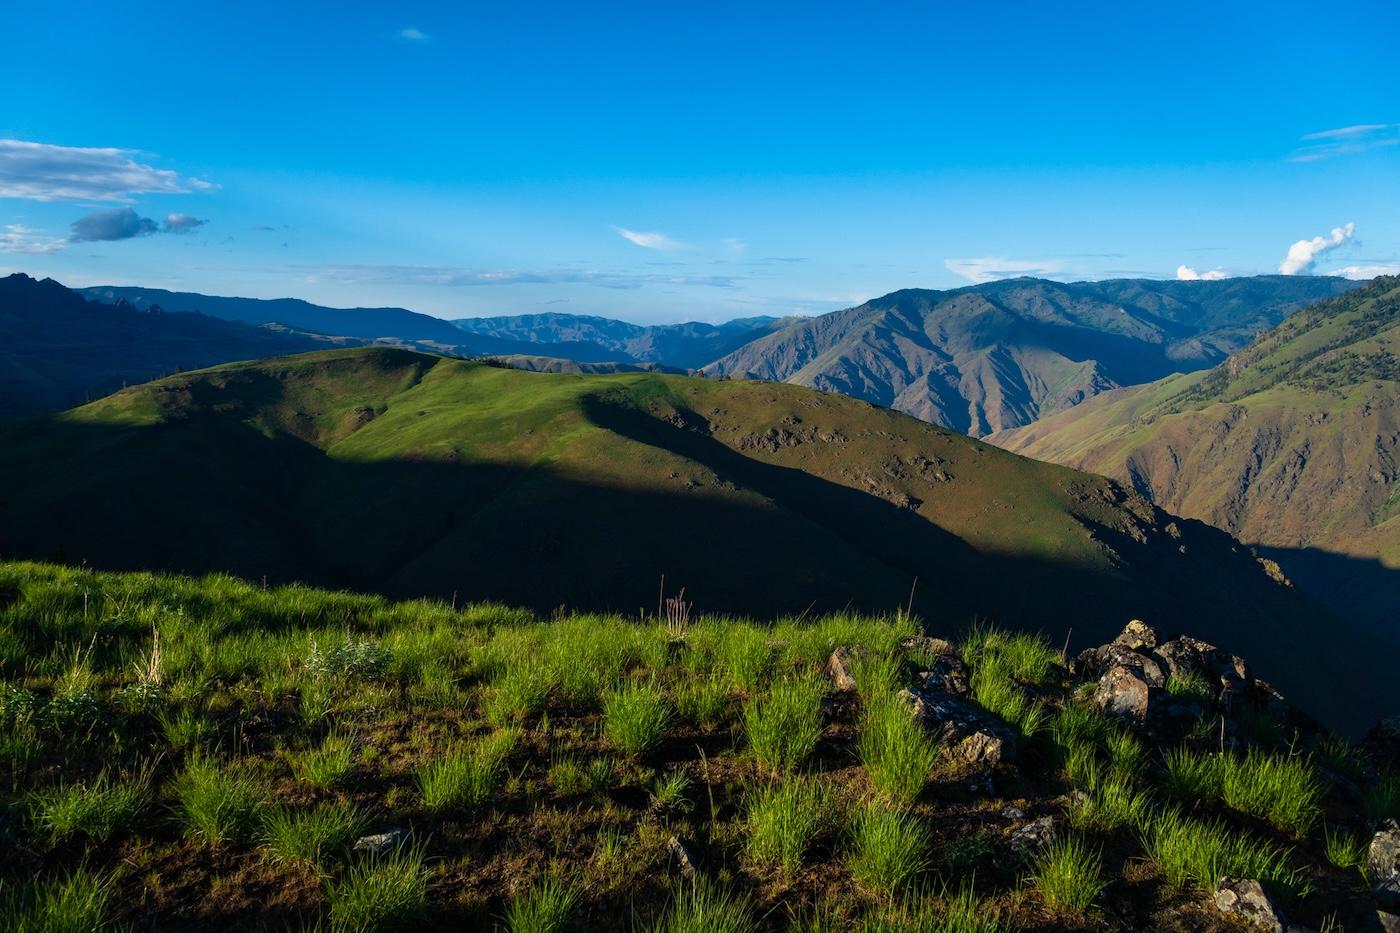 Shadowy hill in Hells Canyon